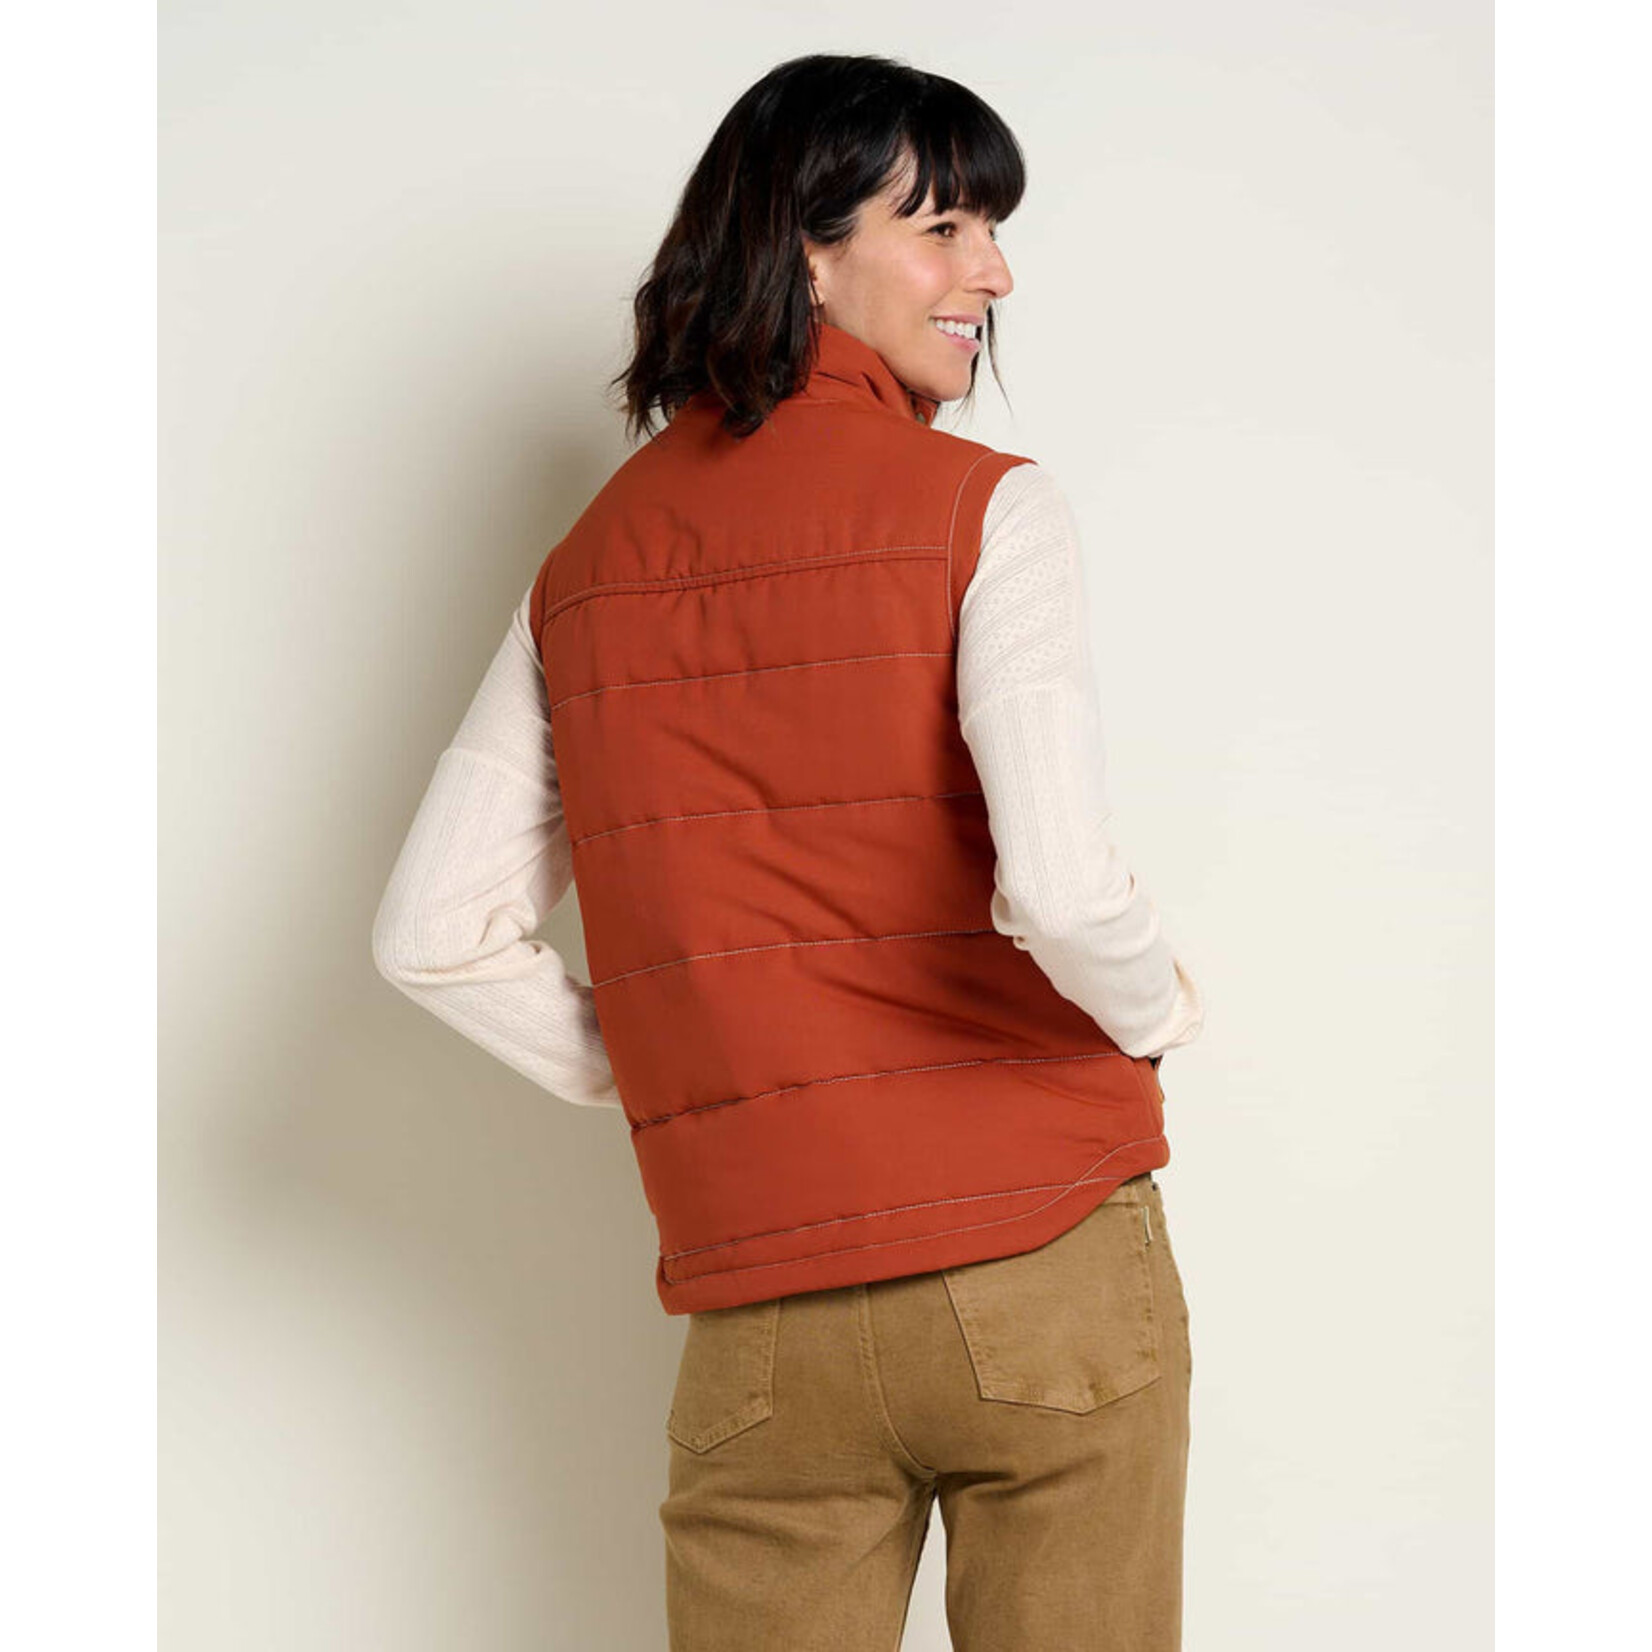 Toad & Co Women's Forester Pass Vest